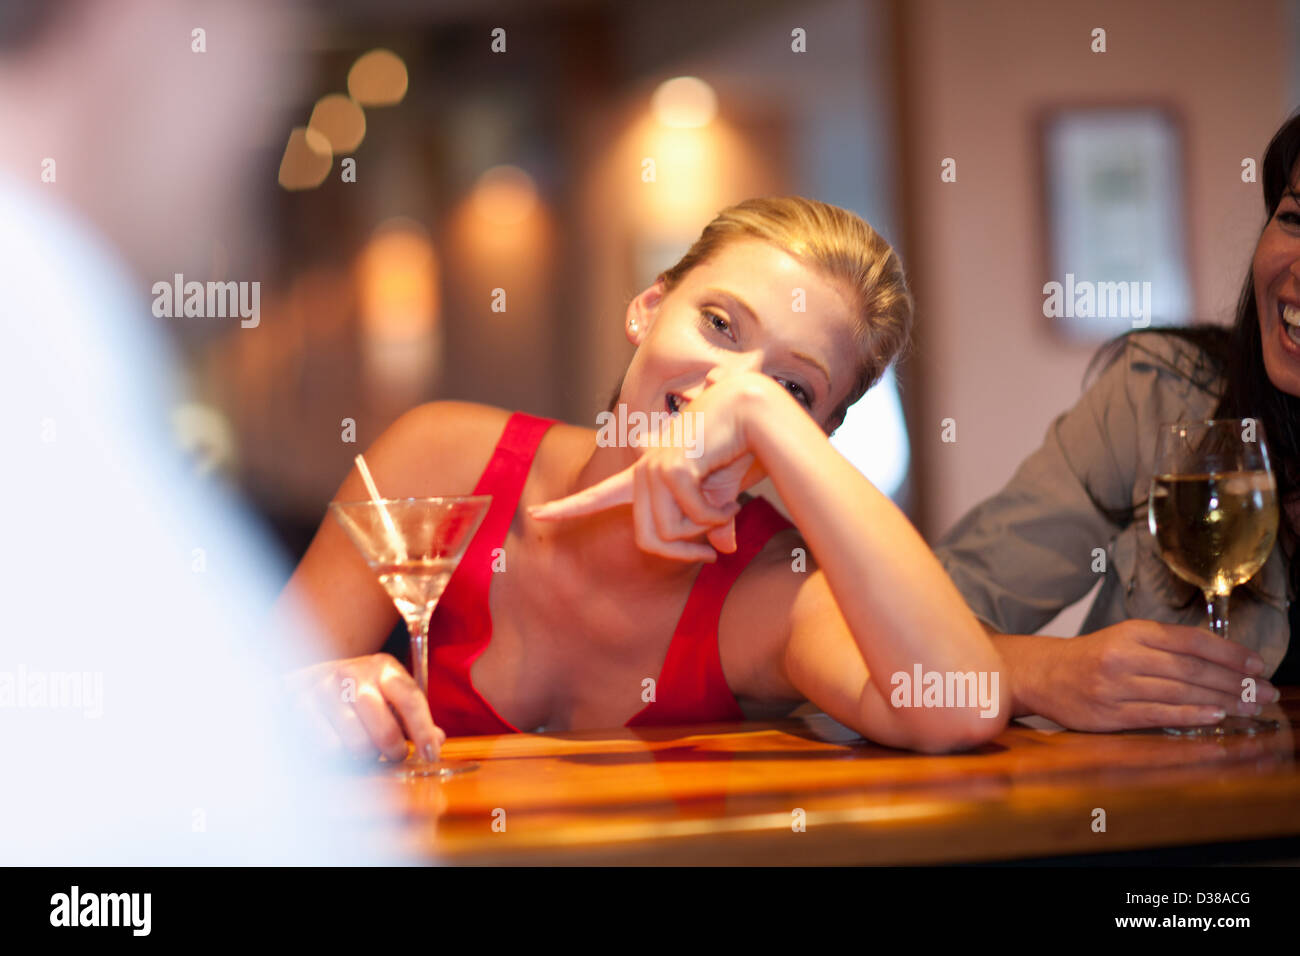 Woman ordering another drink at bar Stock Photo